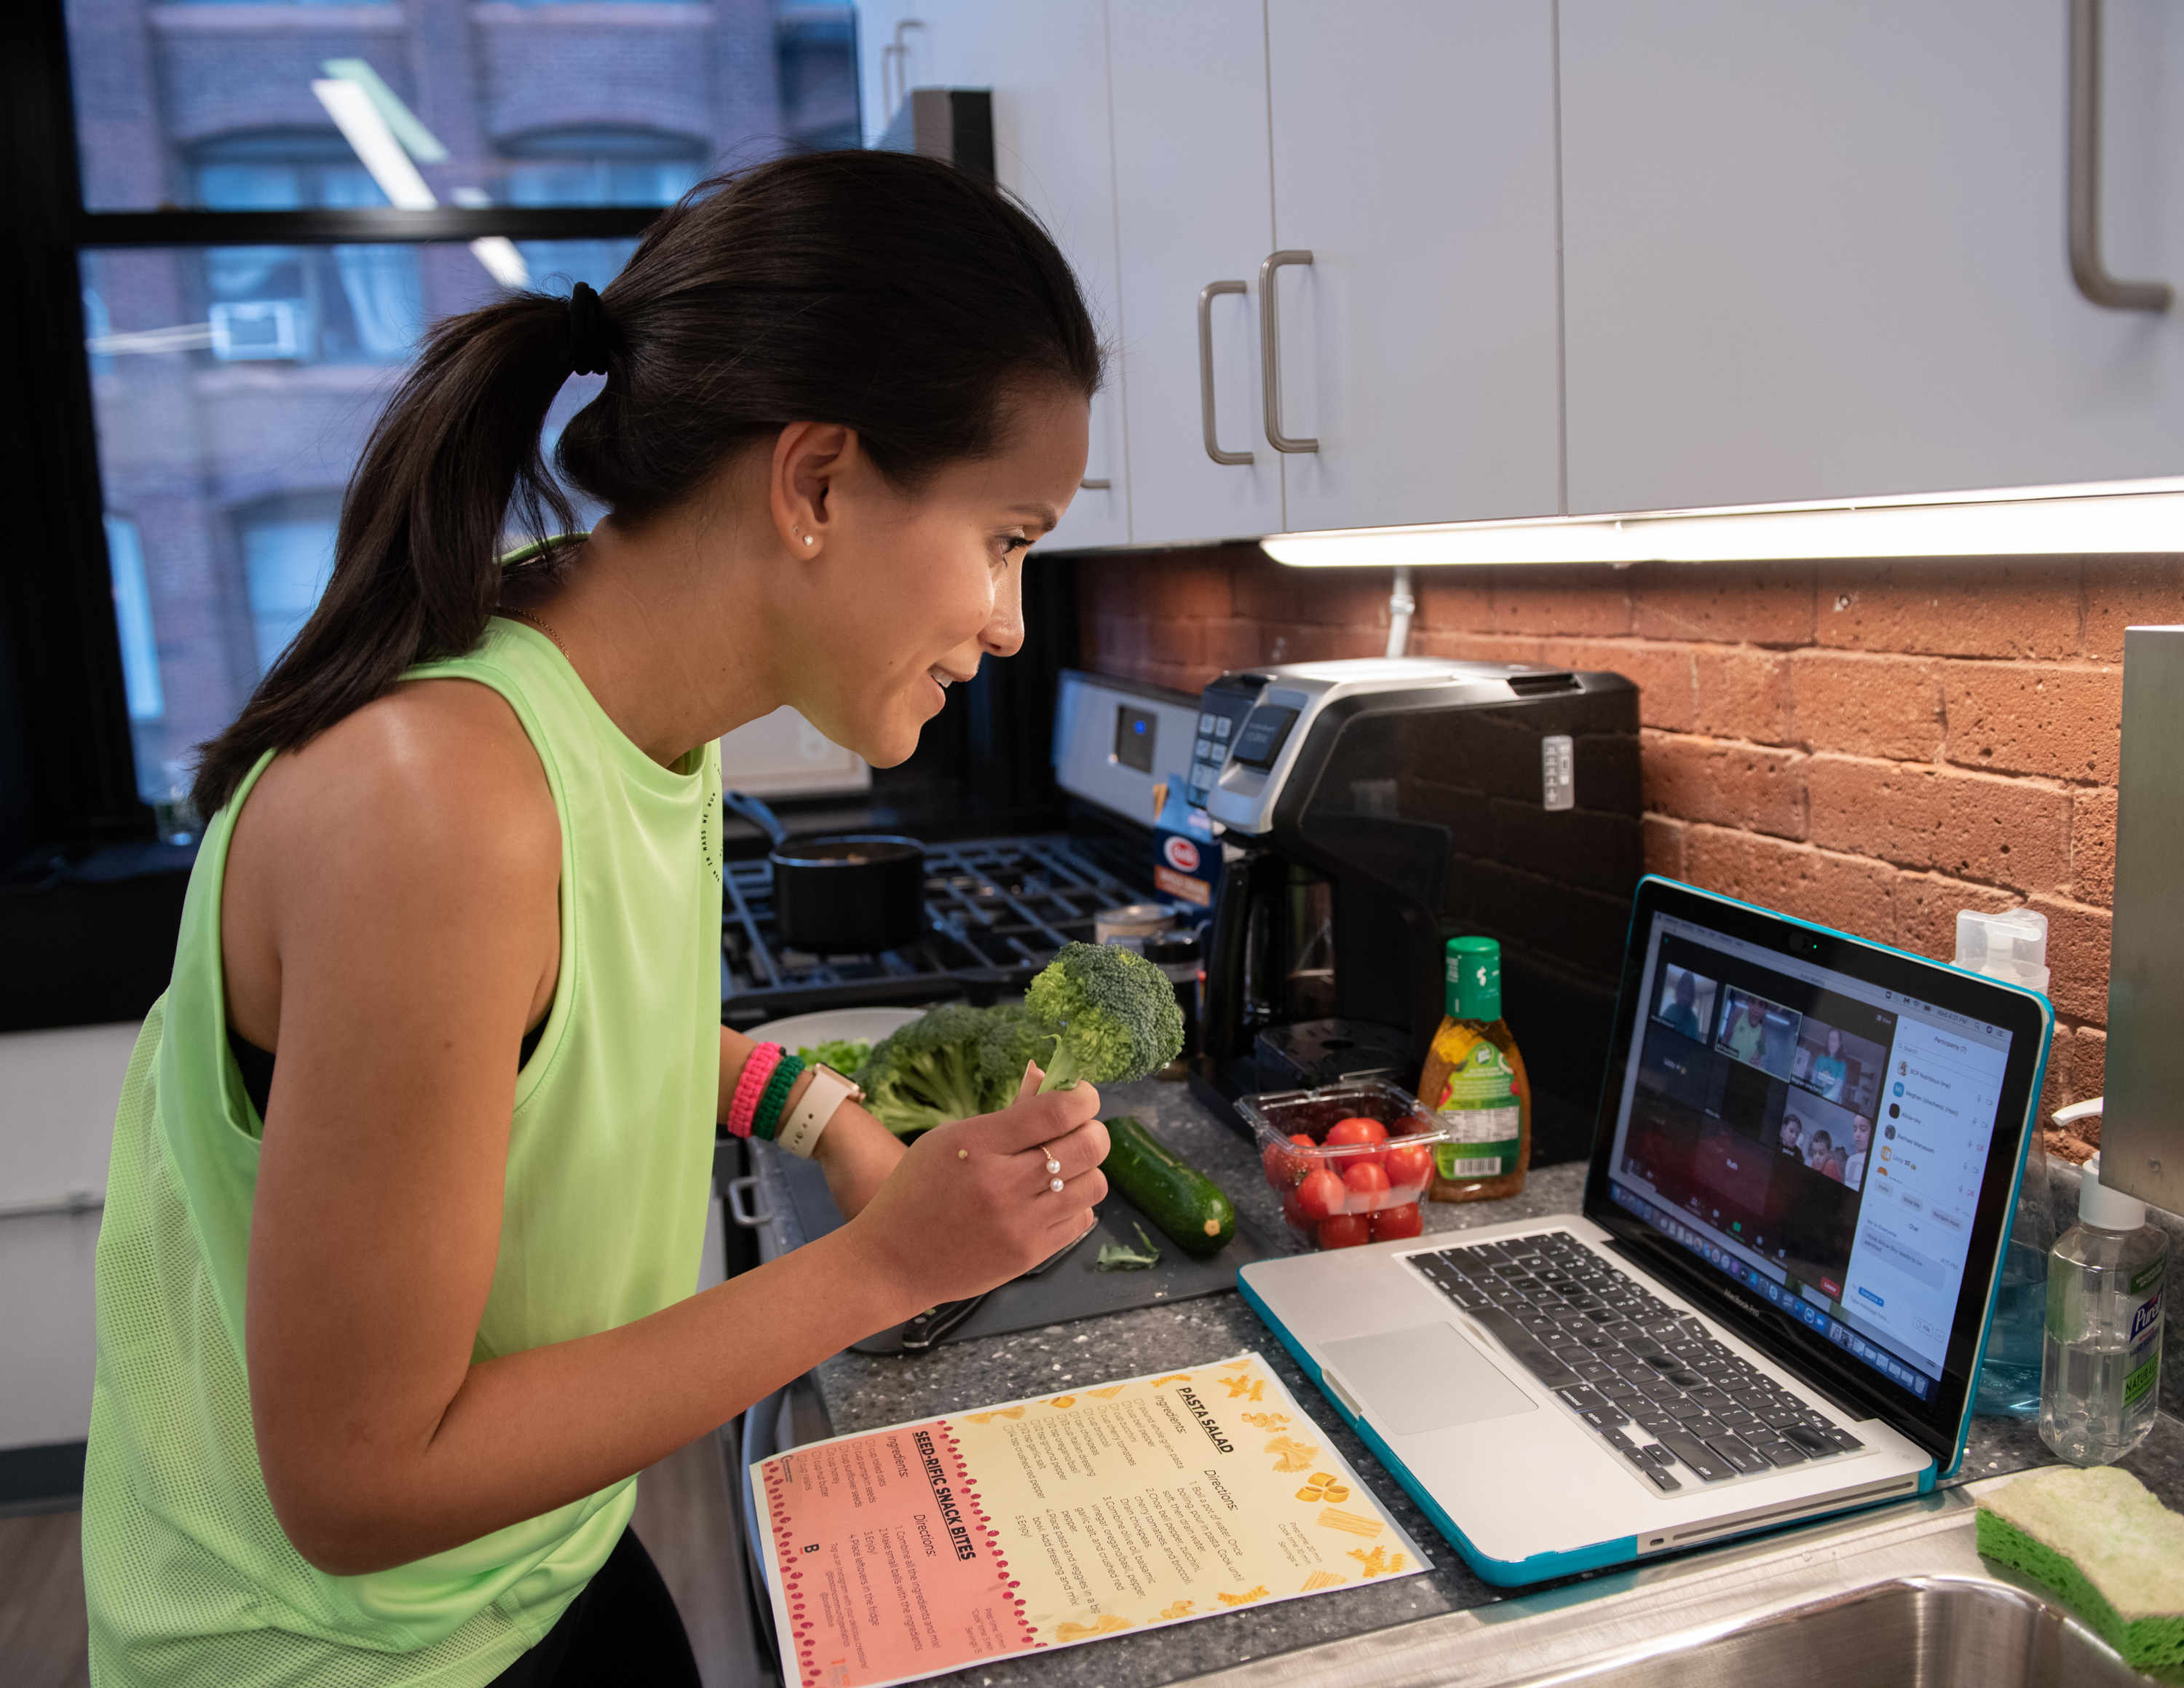 Woman looks into camera of laptop placed on a kitchen counter